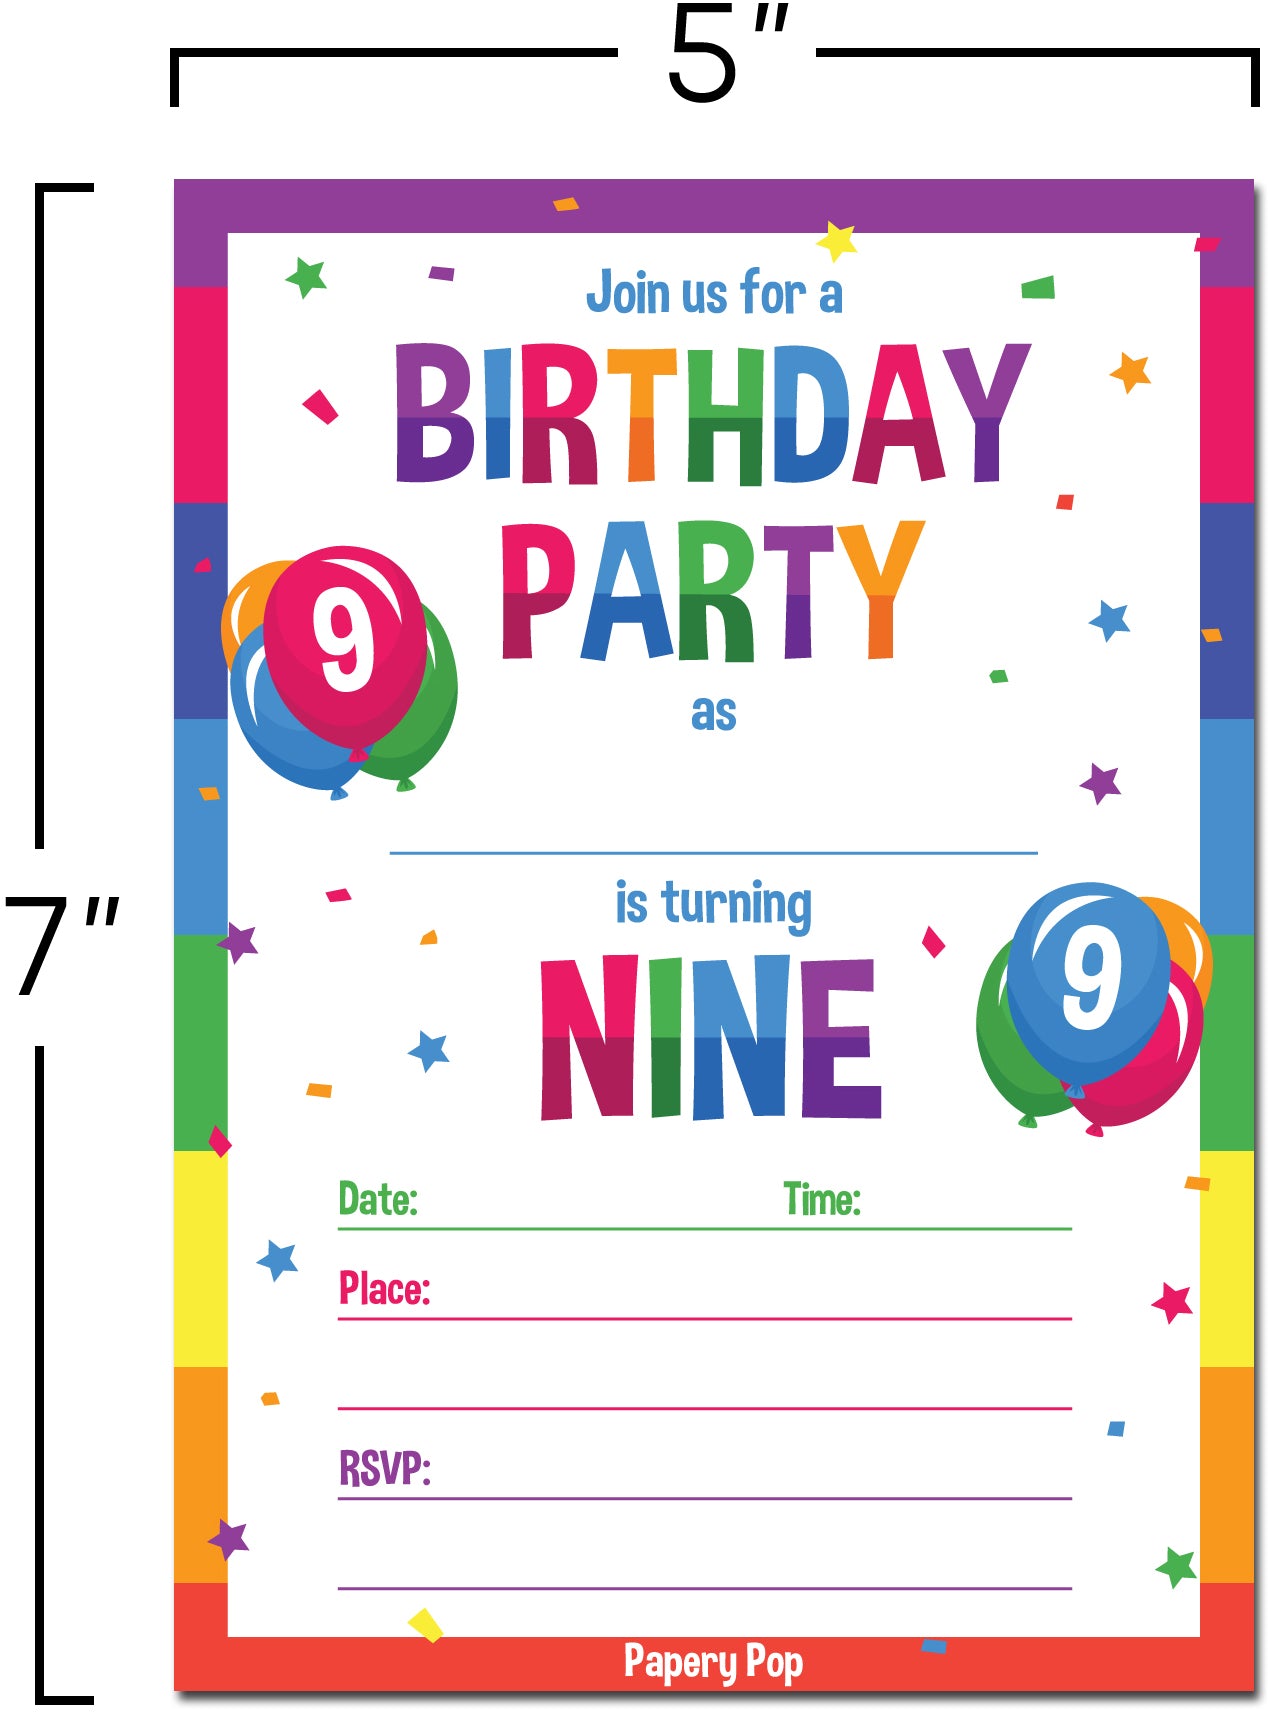 9-year-old-birthday-party-invitations-with-envelopes-15-count-kids-papery-pop